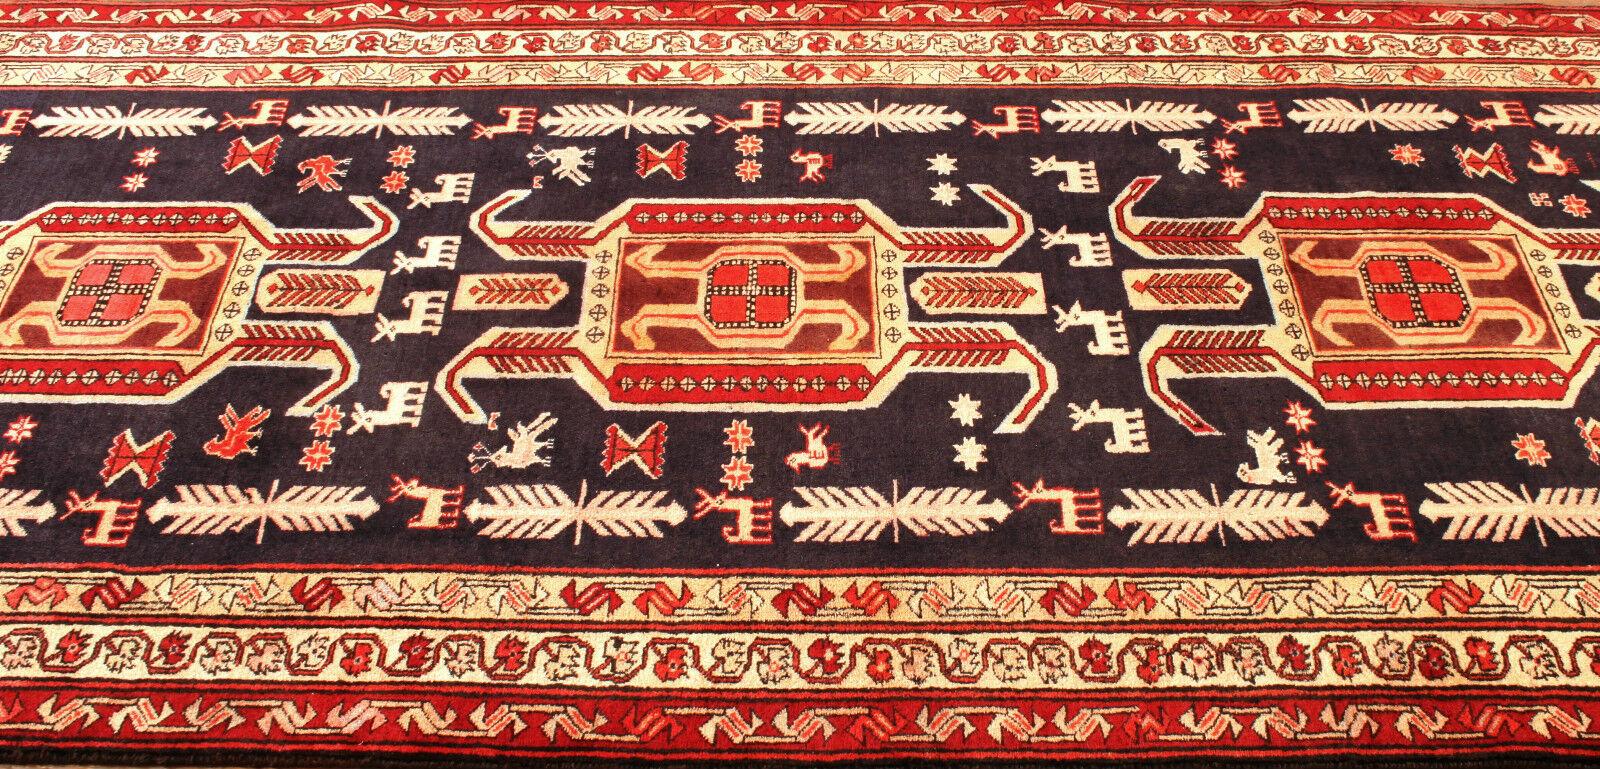 Wool Handmade Vintage Persian Style Malayer Rug 4.5' x 9.2', 1970s - 1T26 For Sale